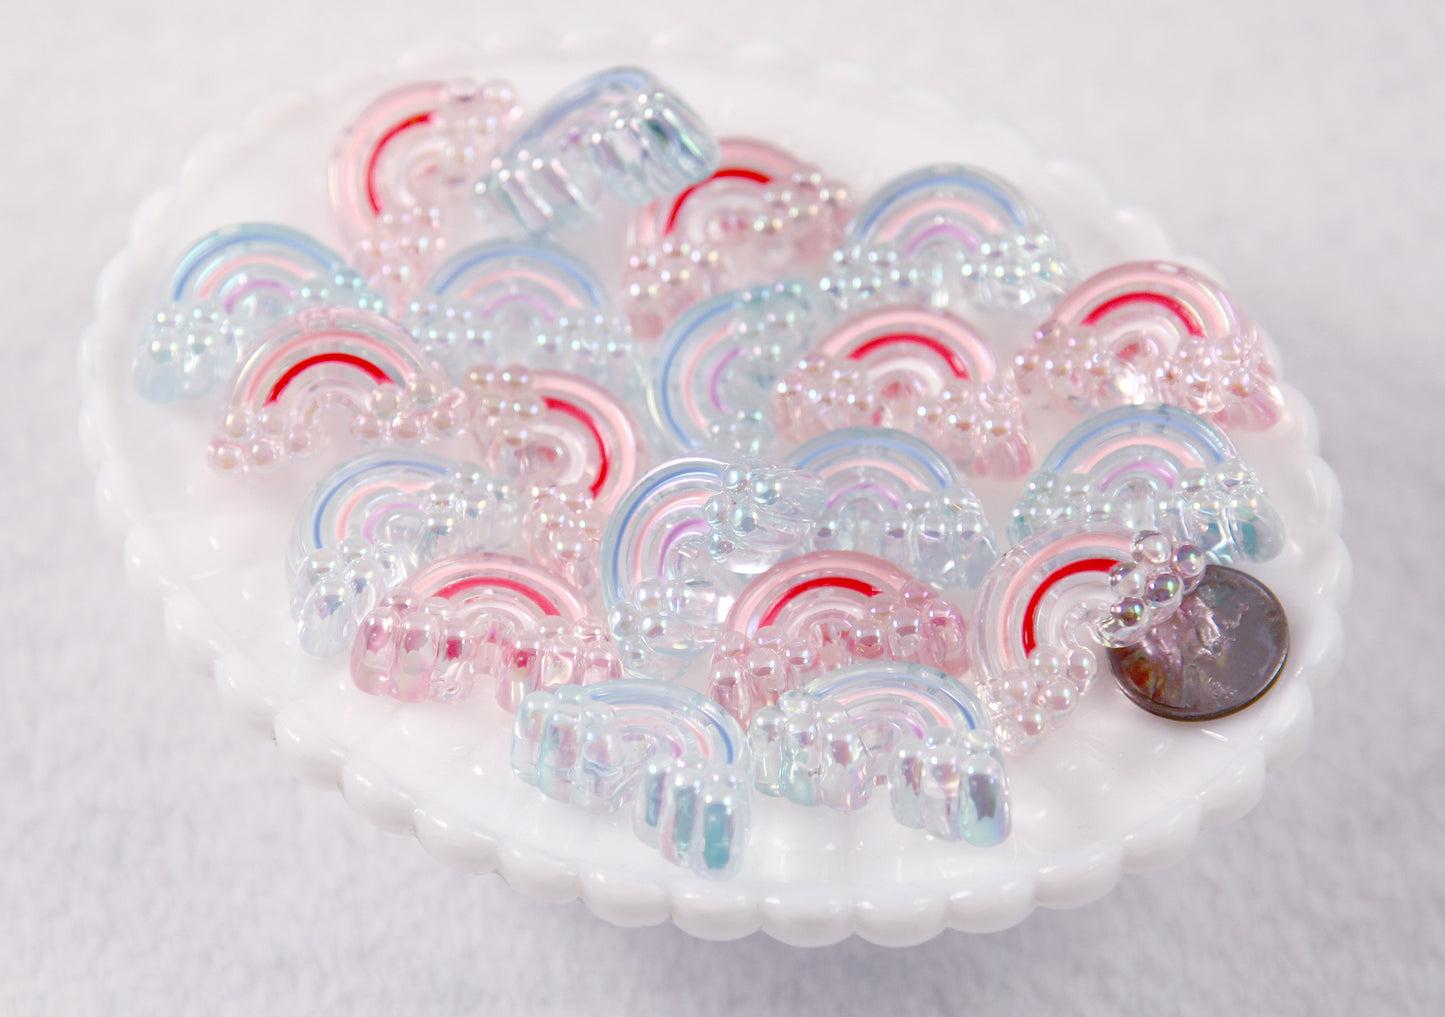 Cute Pastel Beads - 30mm Translucent AB Pastel Rainbow and Clouds Shape Acrylic or Resin Beads - 8 pc set